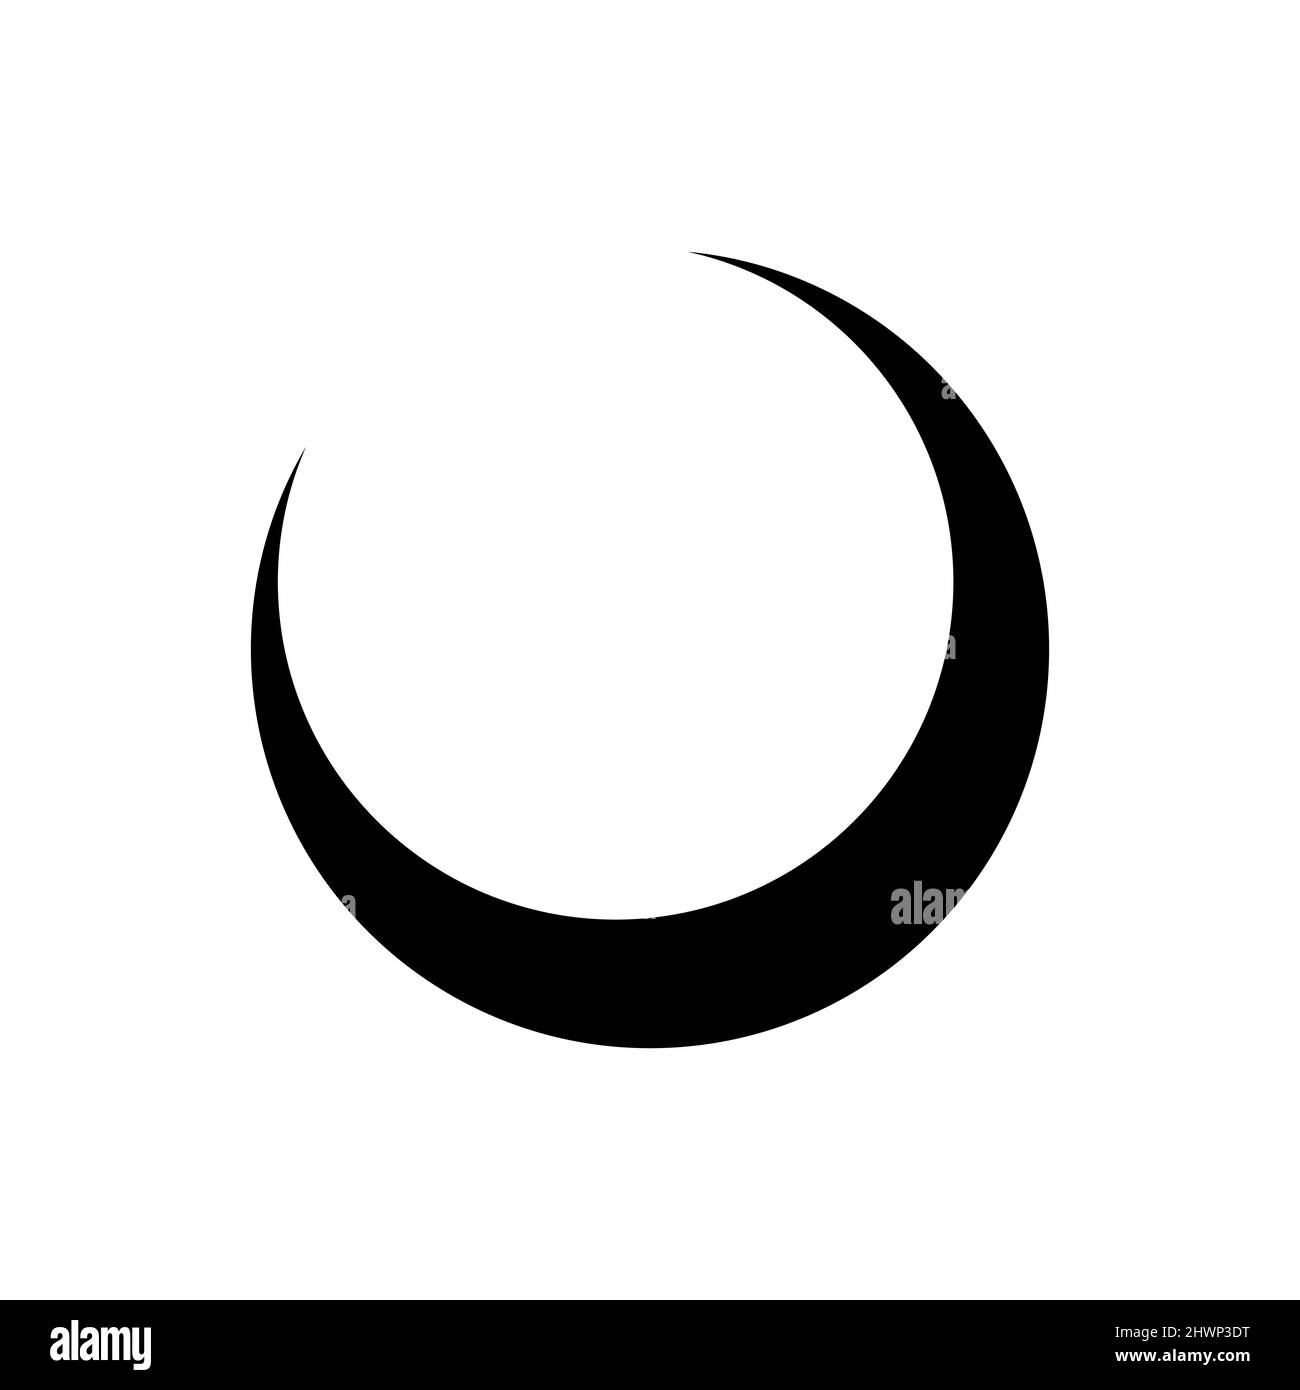 Moon vector icon. Black moon icon. Celestial crescent isolated elements. Stock Vector